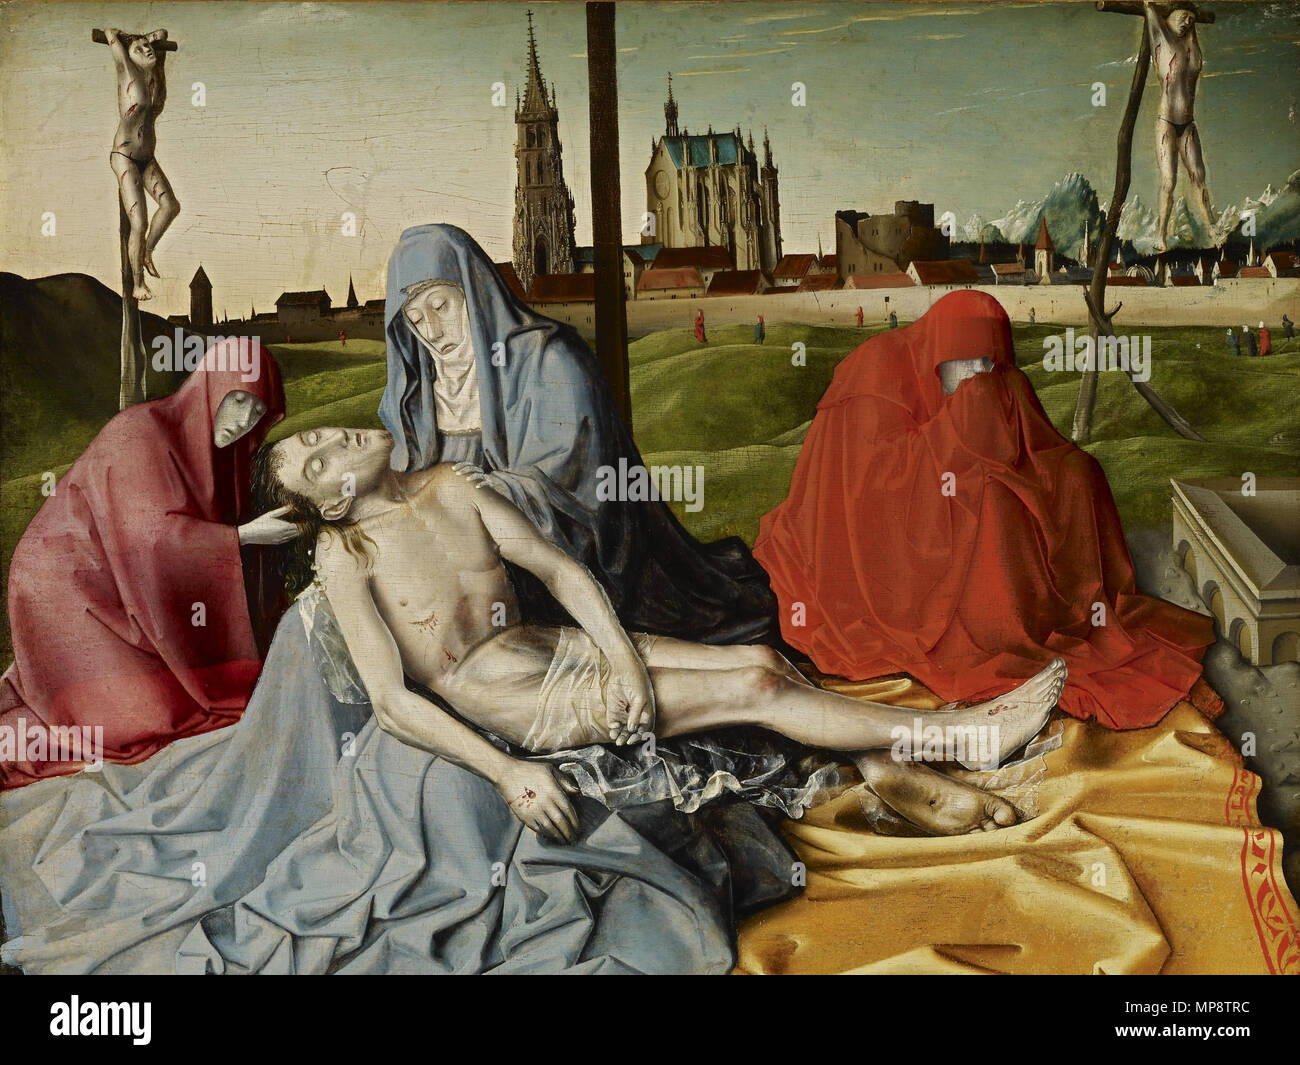 English: Pietà . painting bearing remarkable resemblance to 1907.1.56, painting (with a donor) purchased by Henry Clay Frick in 1907 . circa 1440.   773 Konrad Witz - Lamentation Stock Photo